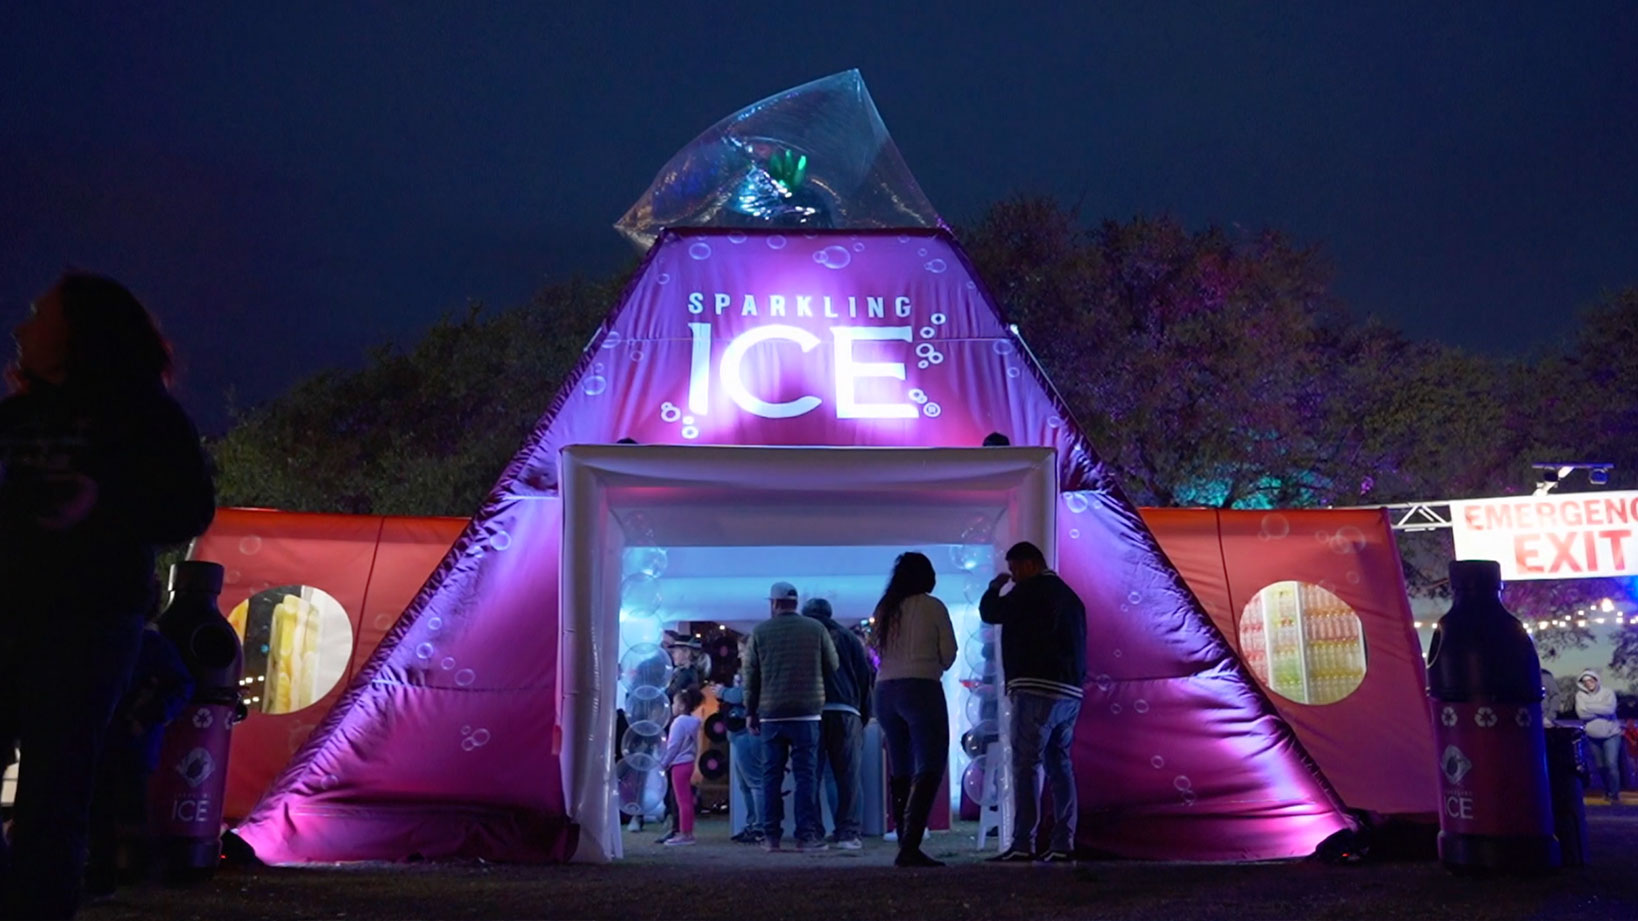 Sparkling Ice – Experiential Design and Festival Activations